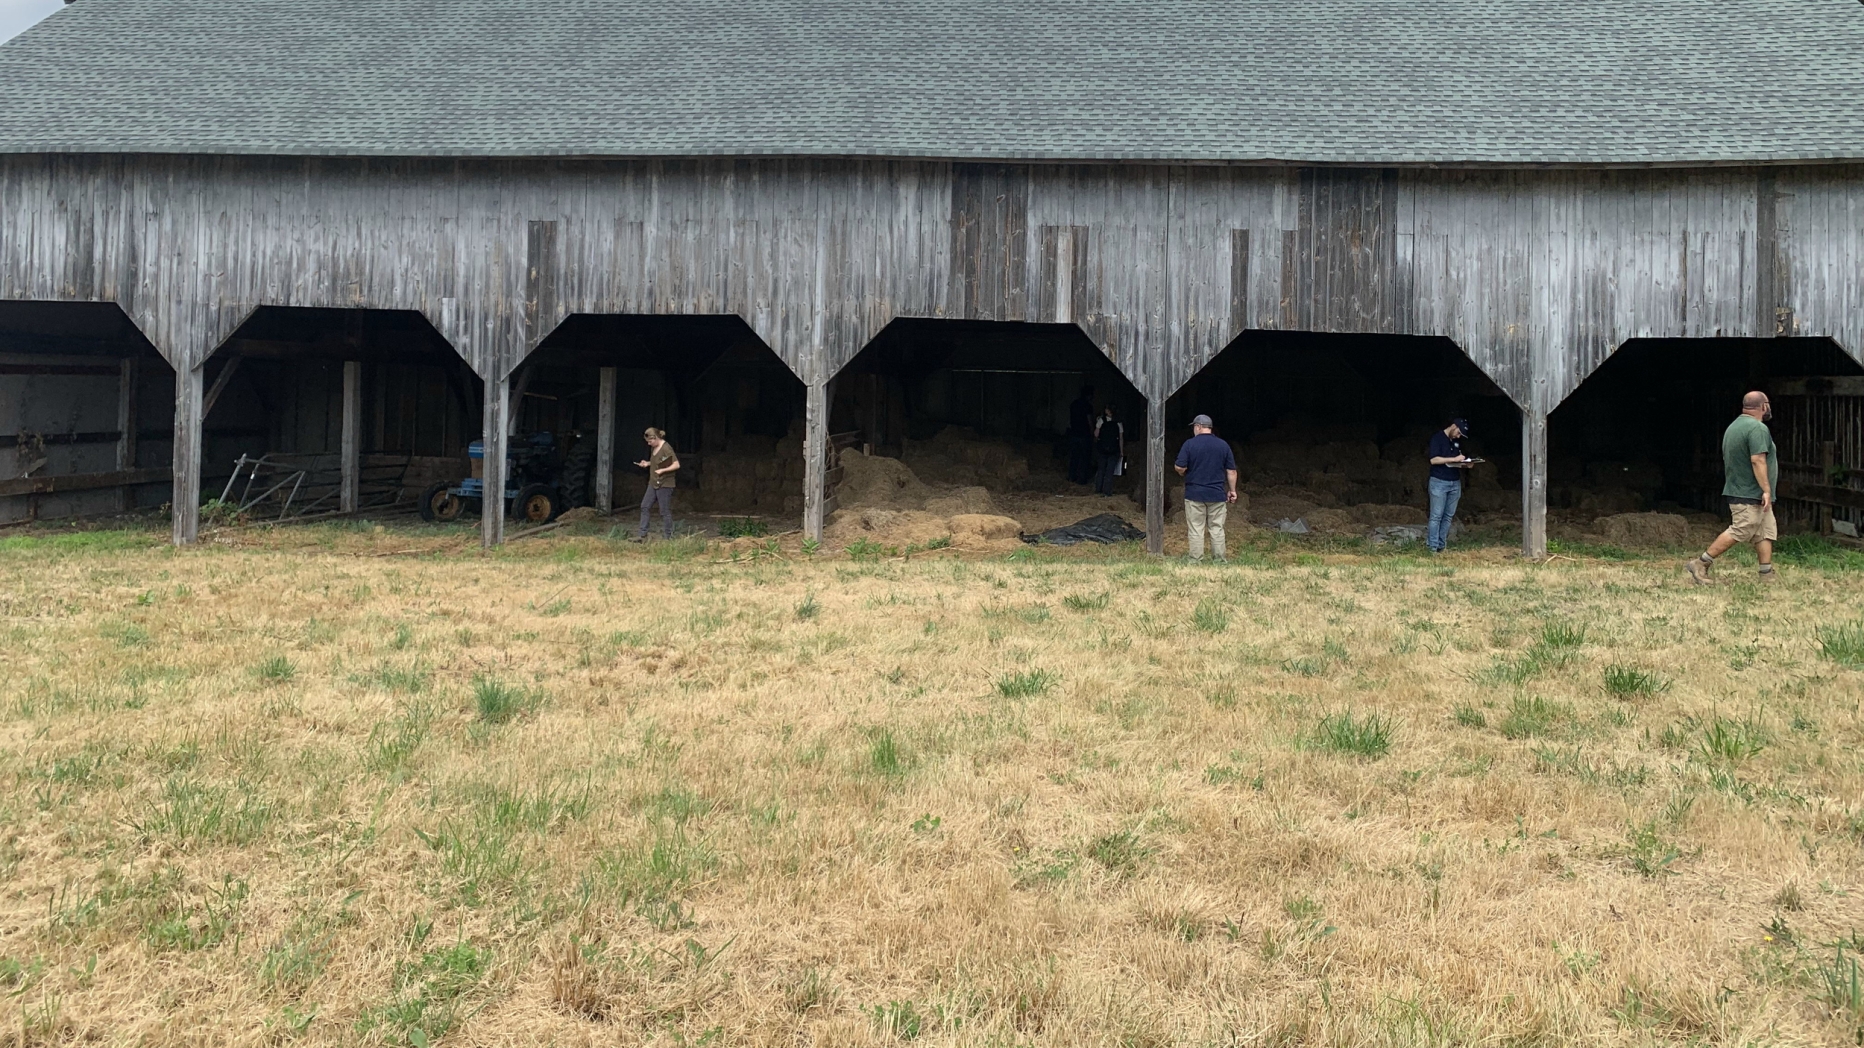 Field Survey Day. Conditions Assessment for Hey Barn in Natirar Fars, Somerset County, NJ